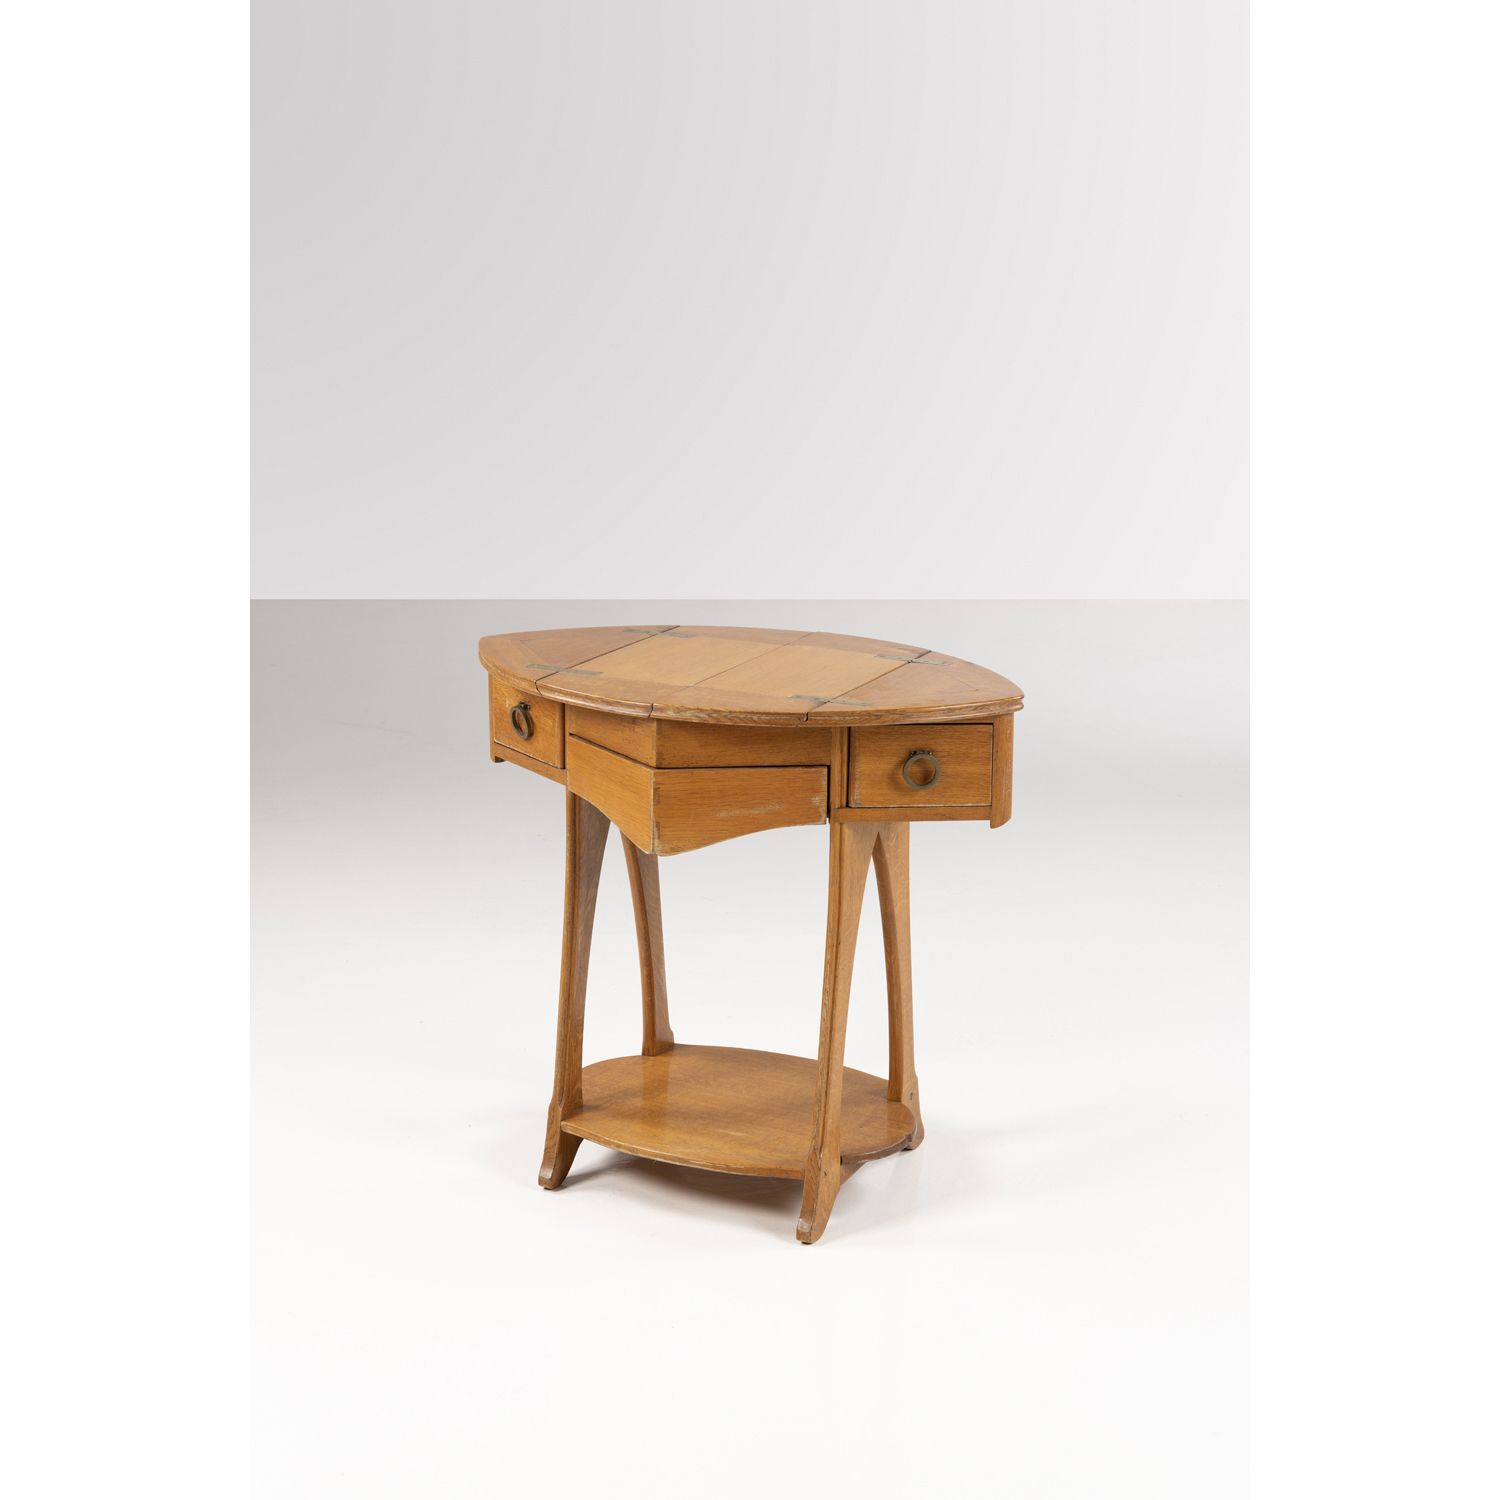 Null Arts and Crafts production (19th c.-20th c.)

Work table, circa 1900

Wood &hellip;